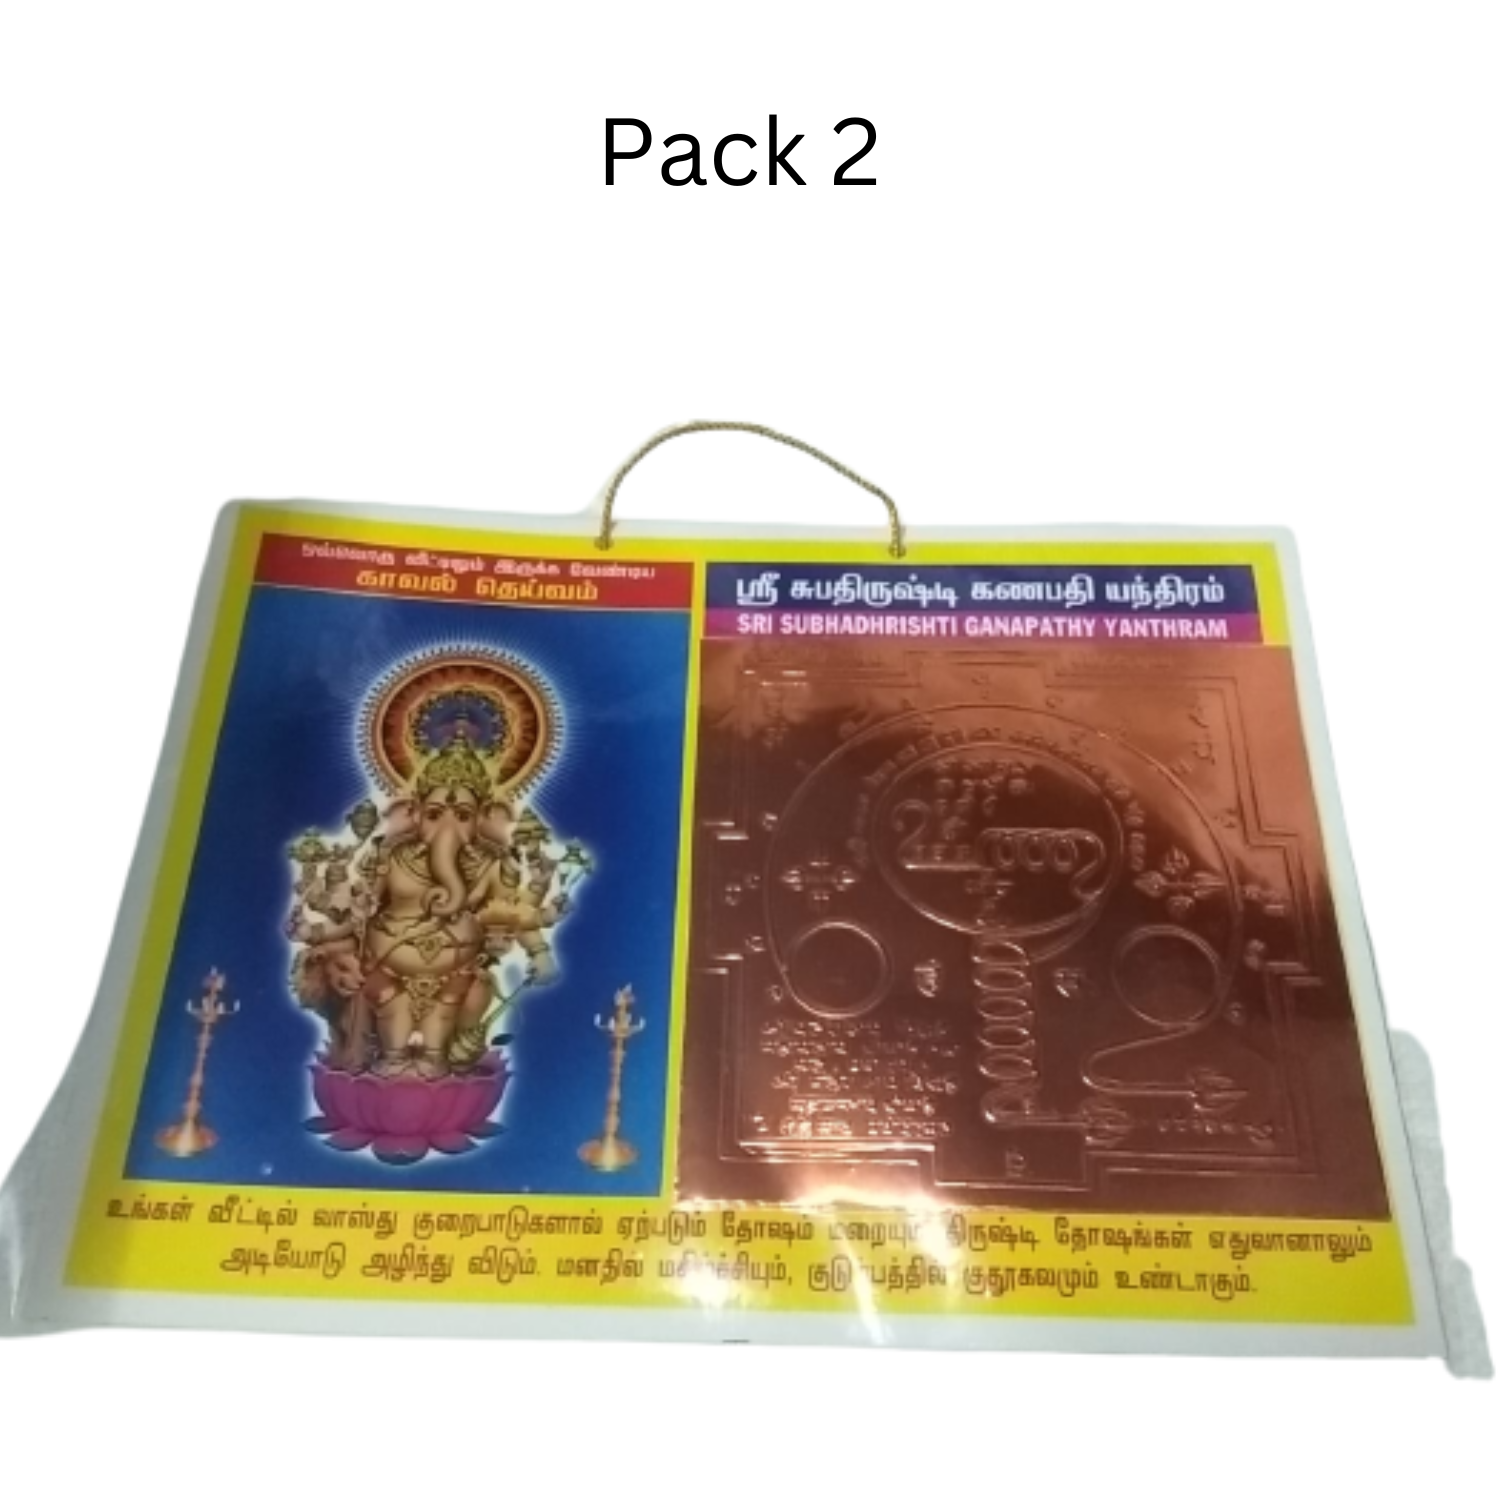 Sri Subhadhrishti Ganapathy Yantram with photo Laminations Wall Hanging Fram Total 2 pack  - Gold Plated Copper Big Size,12x9in